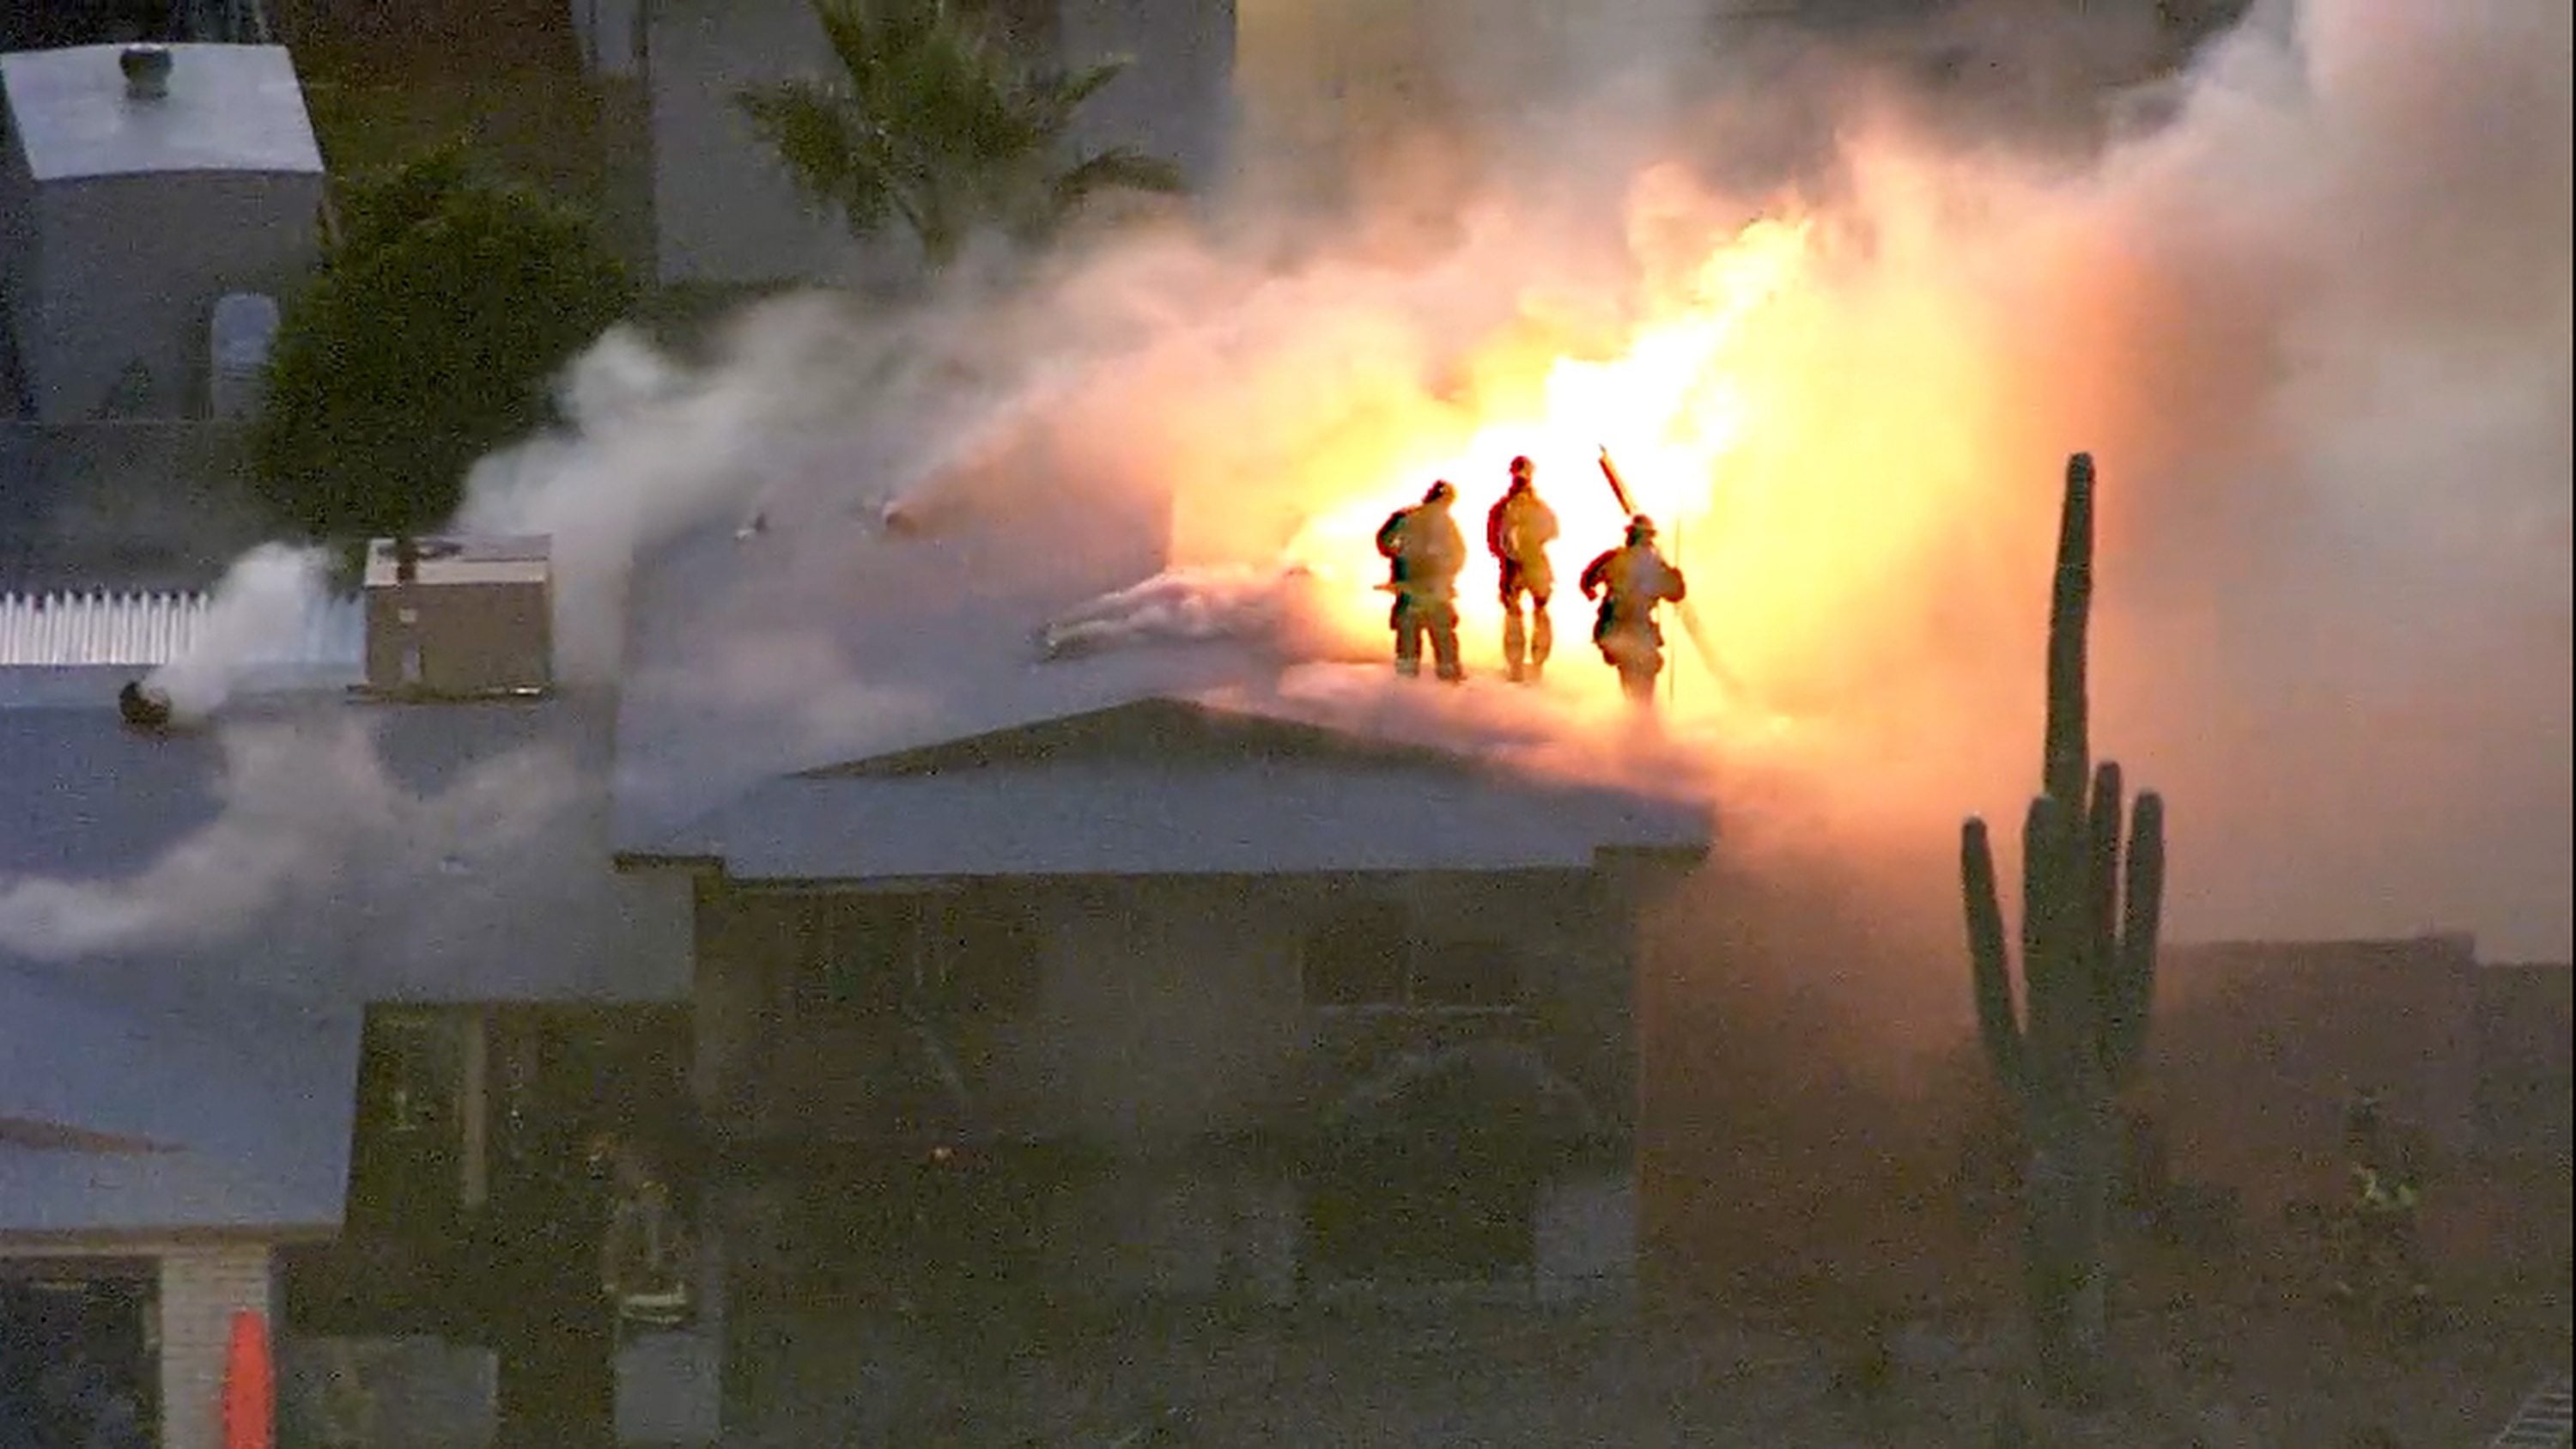 Firefighters atop a house engulfed in flames in Phoenix on Tuesda. Police and firefighters braved bullets and flames as they responded to the fatal shooting and house fire.